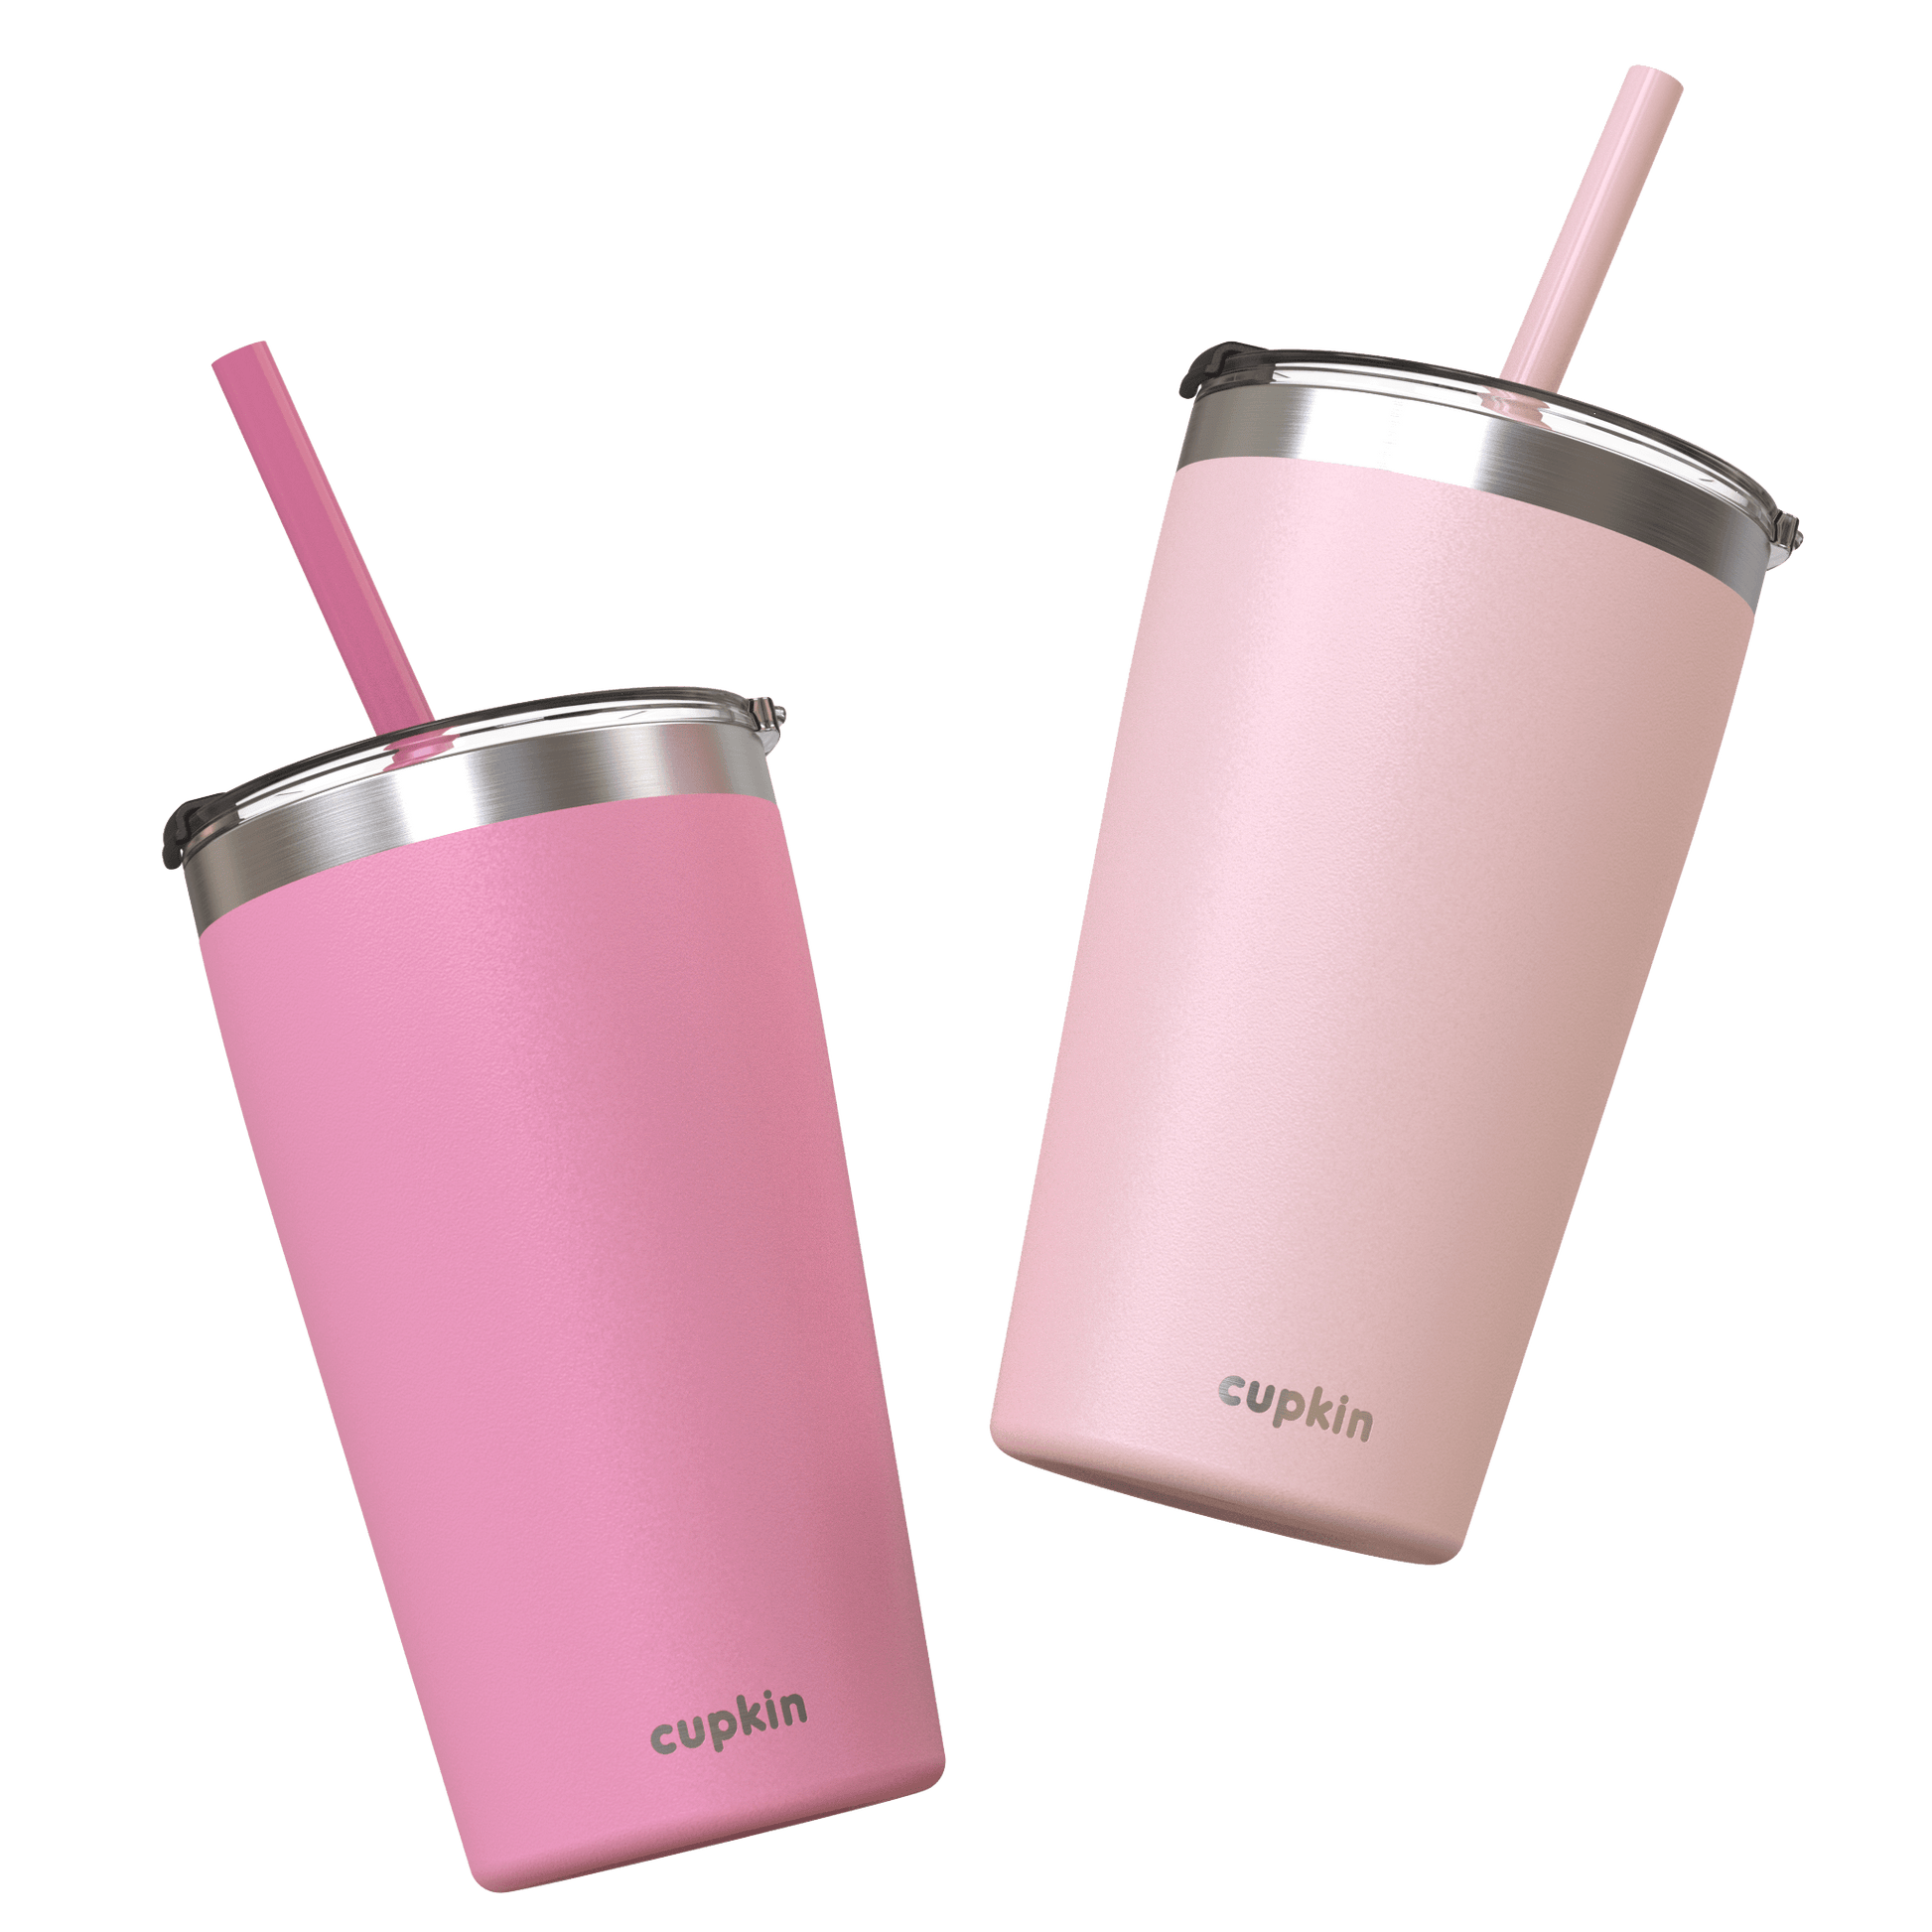 Kids Smoothie cups – Little Ecos